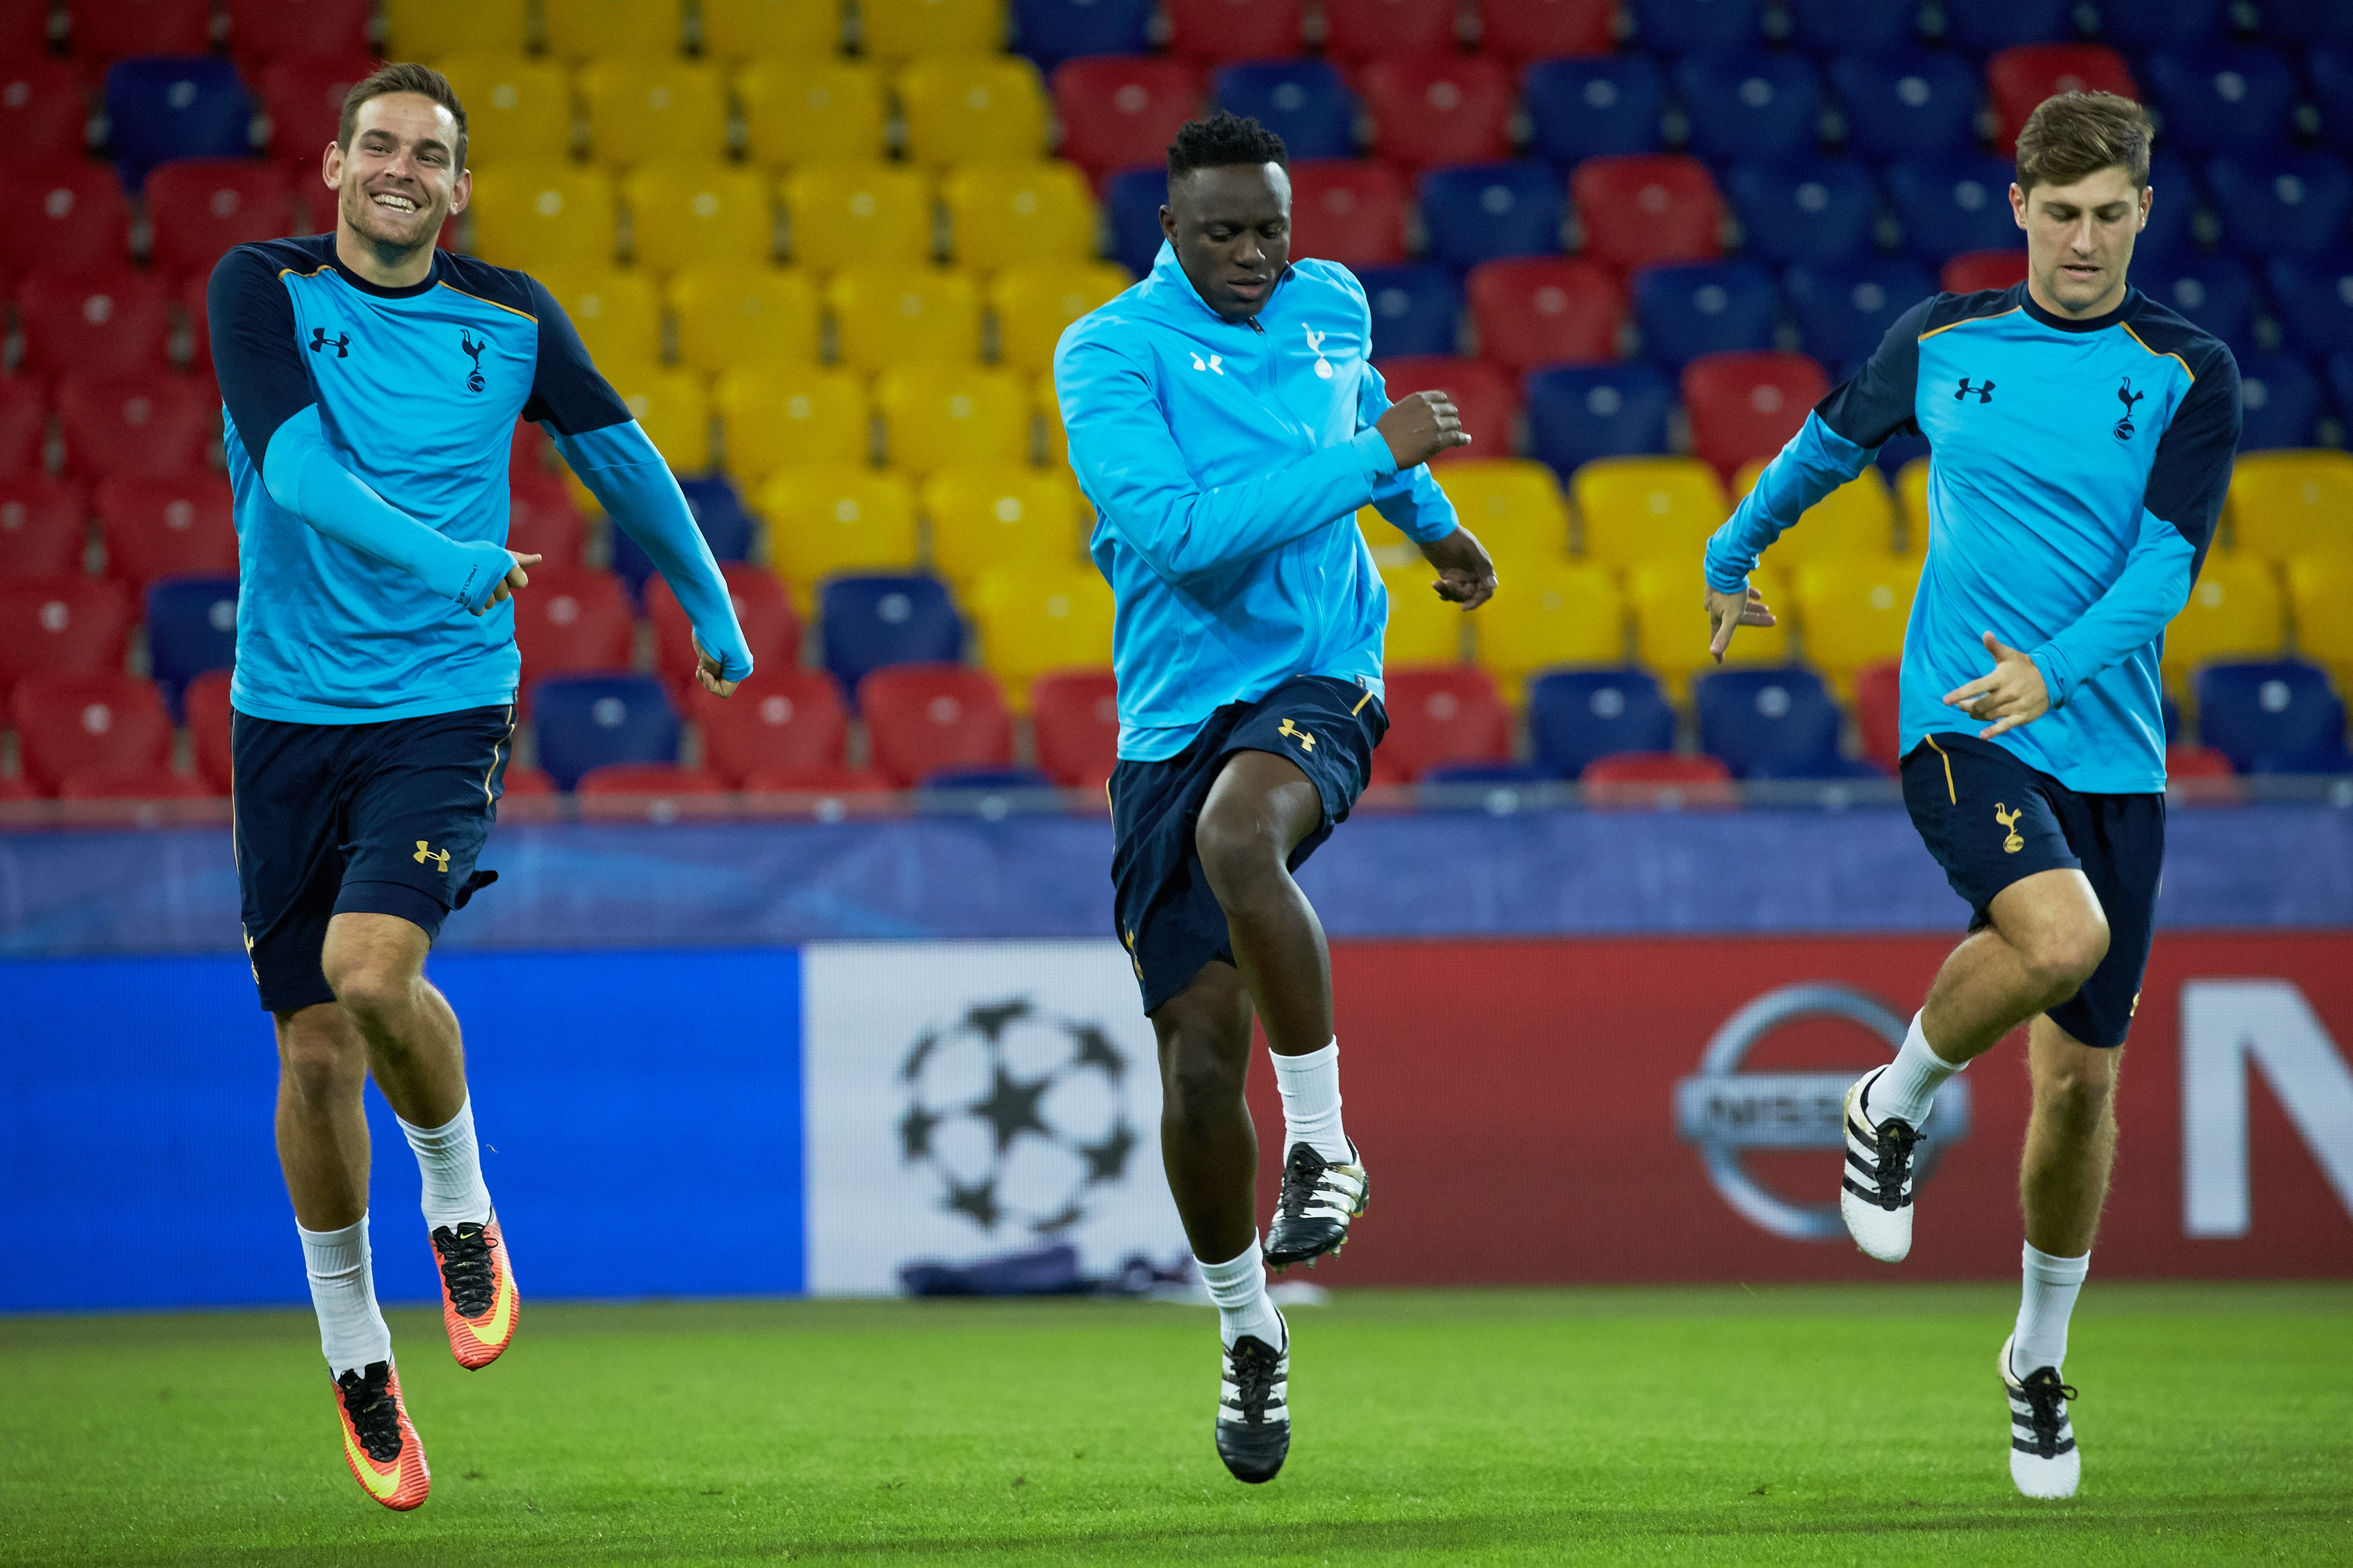 MOSCOW, RUSSIA - SEPTEMBER 26: (L-R) Vincent Janssen, Victor Wanyama and Ben Davies of Tottenham Hotspur during a training session at the CSKA arena on September 26, 2016 on the eve of the UEFA Champions League group E football match between CSKA Moscow and Tottenham in Moscow, Russia. (Photo by Oleg Nikishin/Getty Images)